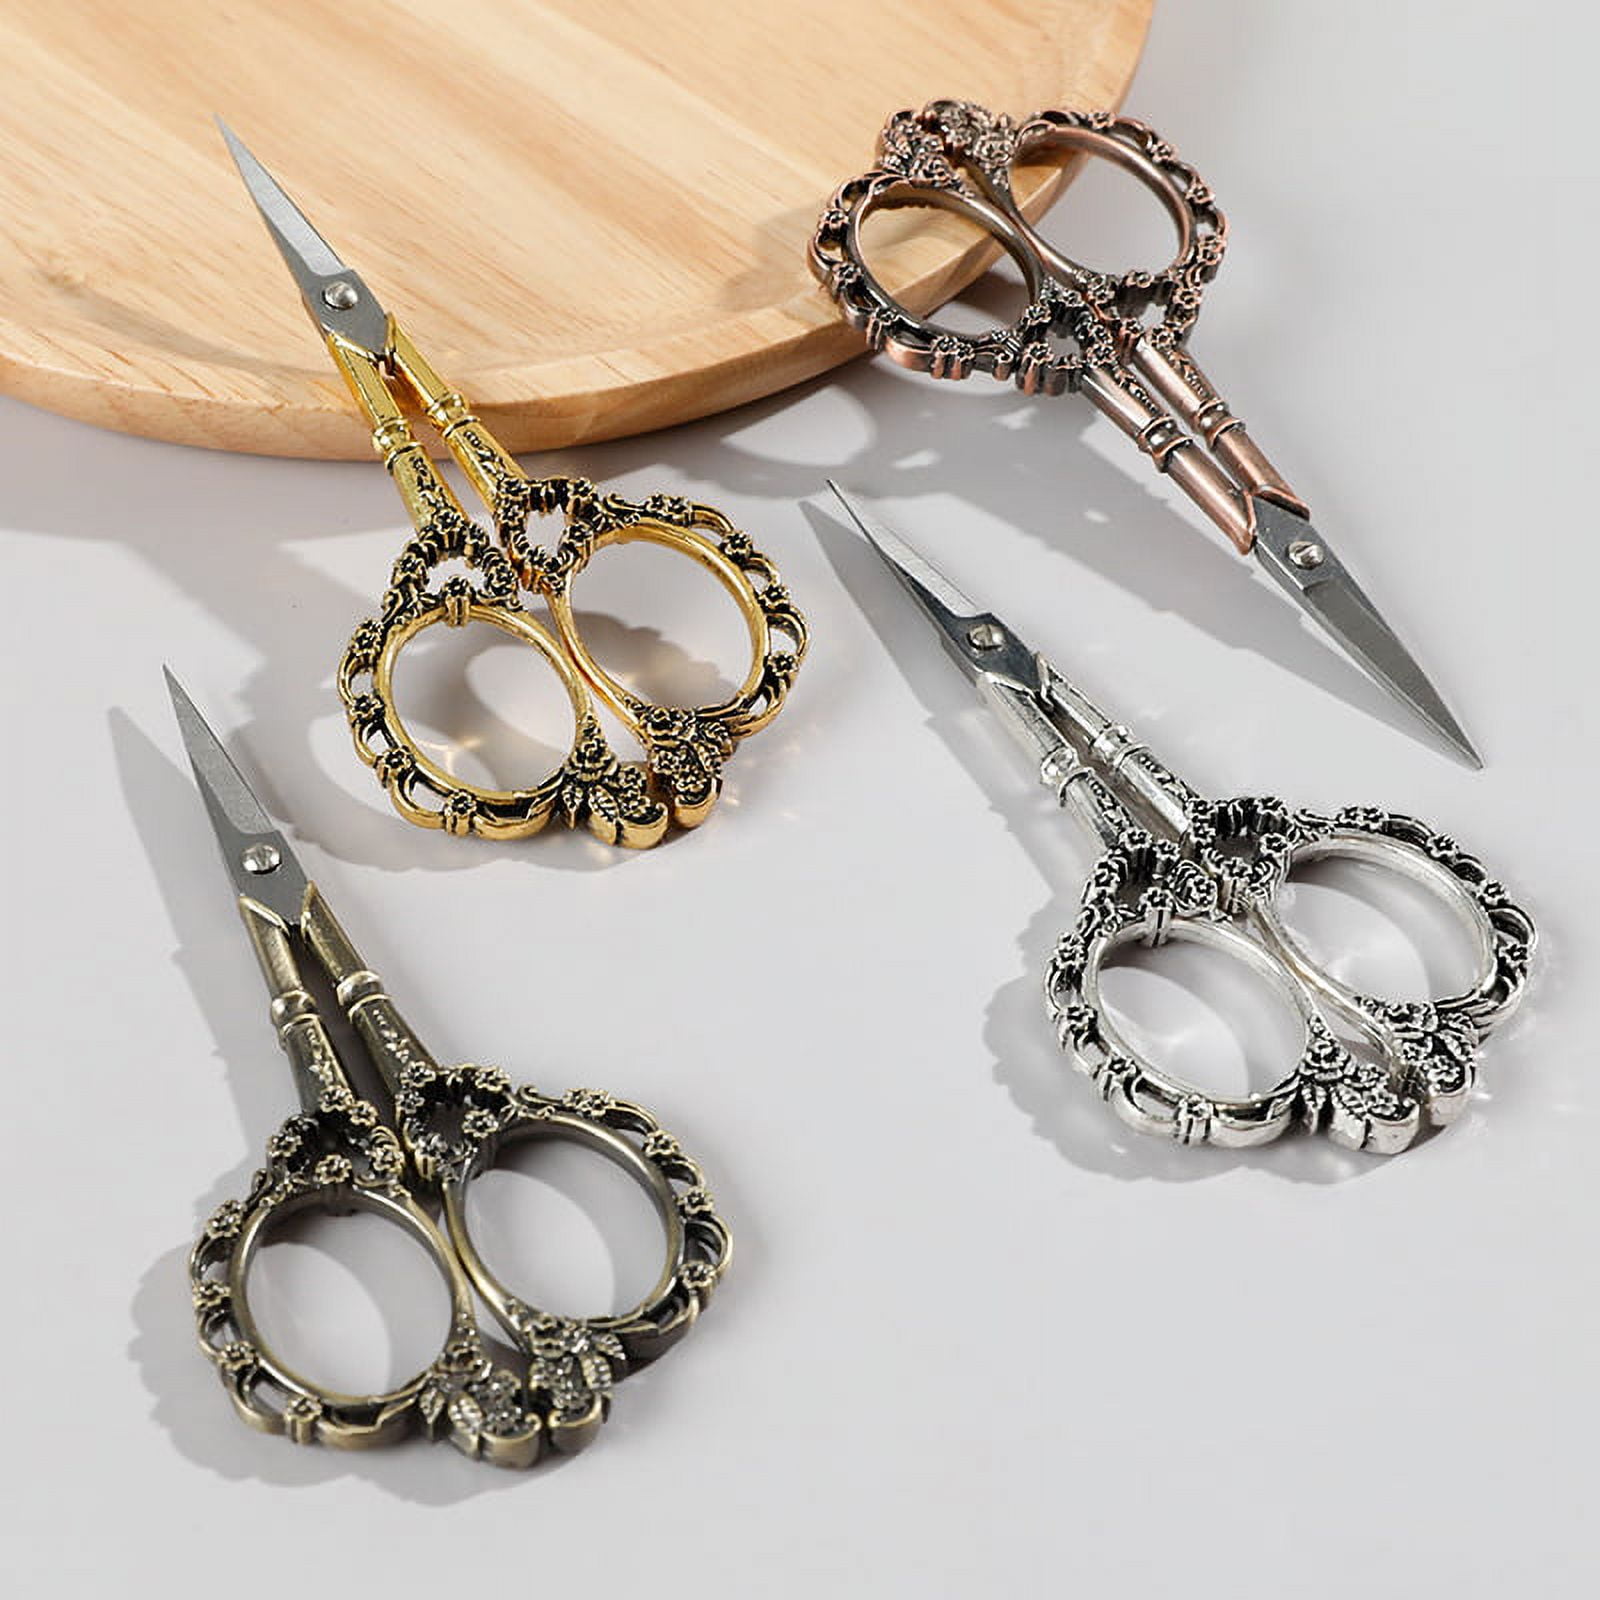 Vintage European Style Scissors for Embroidery, Sewing, Craft, Art Work &  Everyday Use 